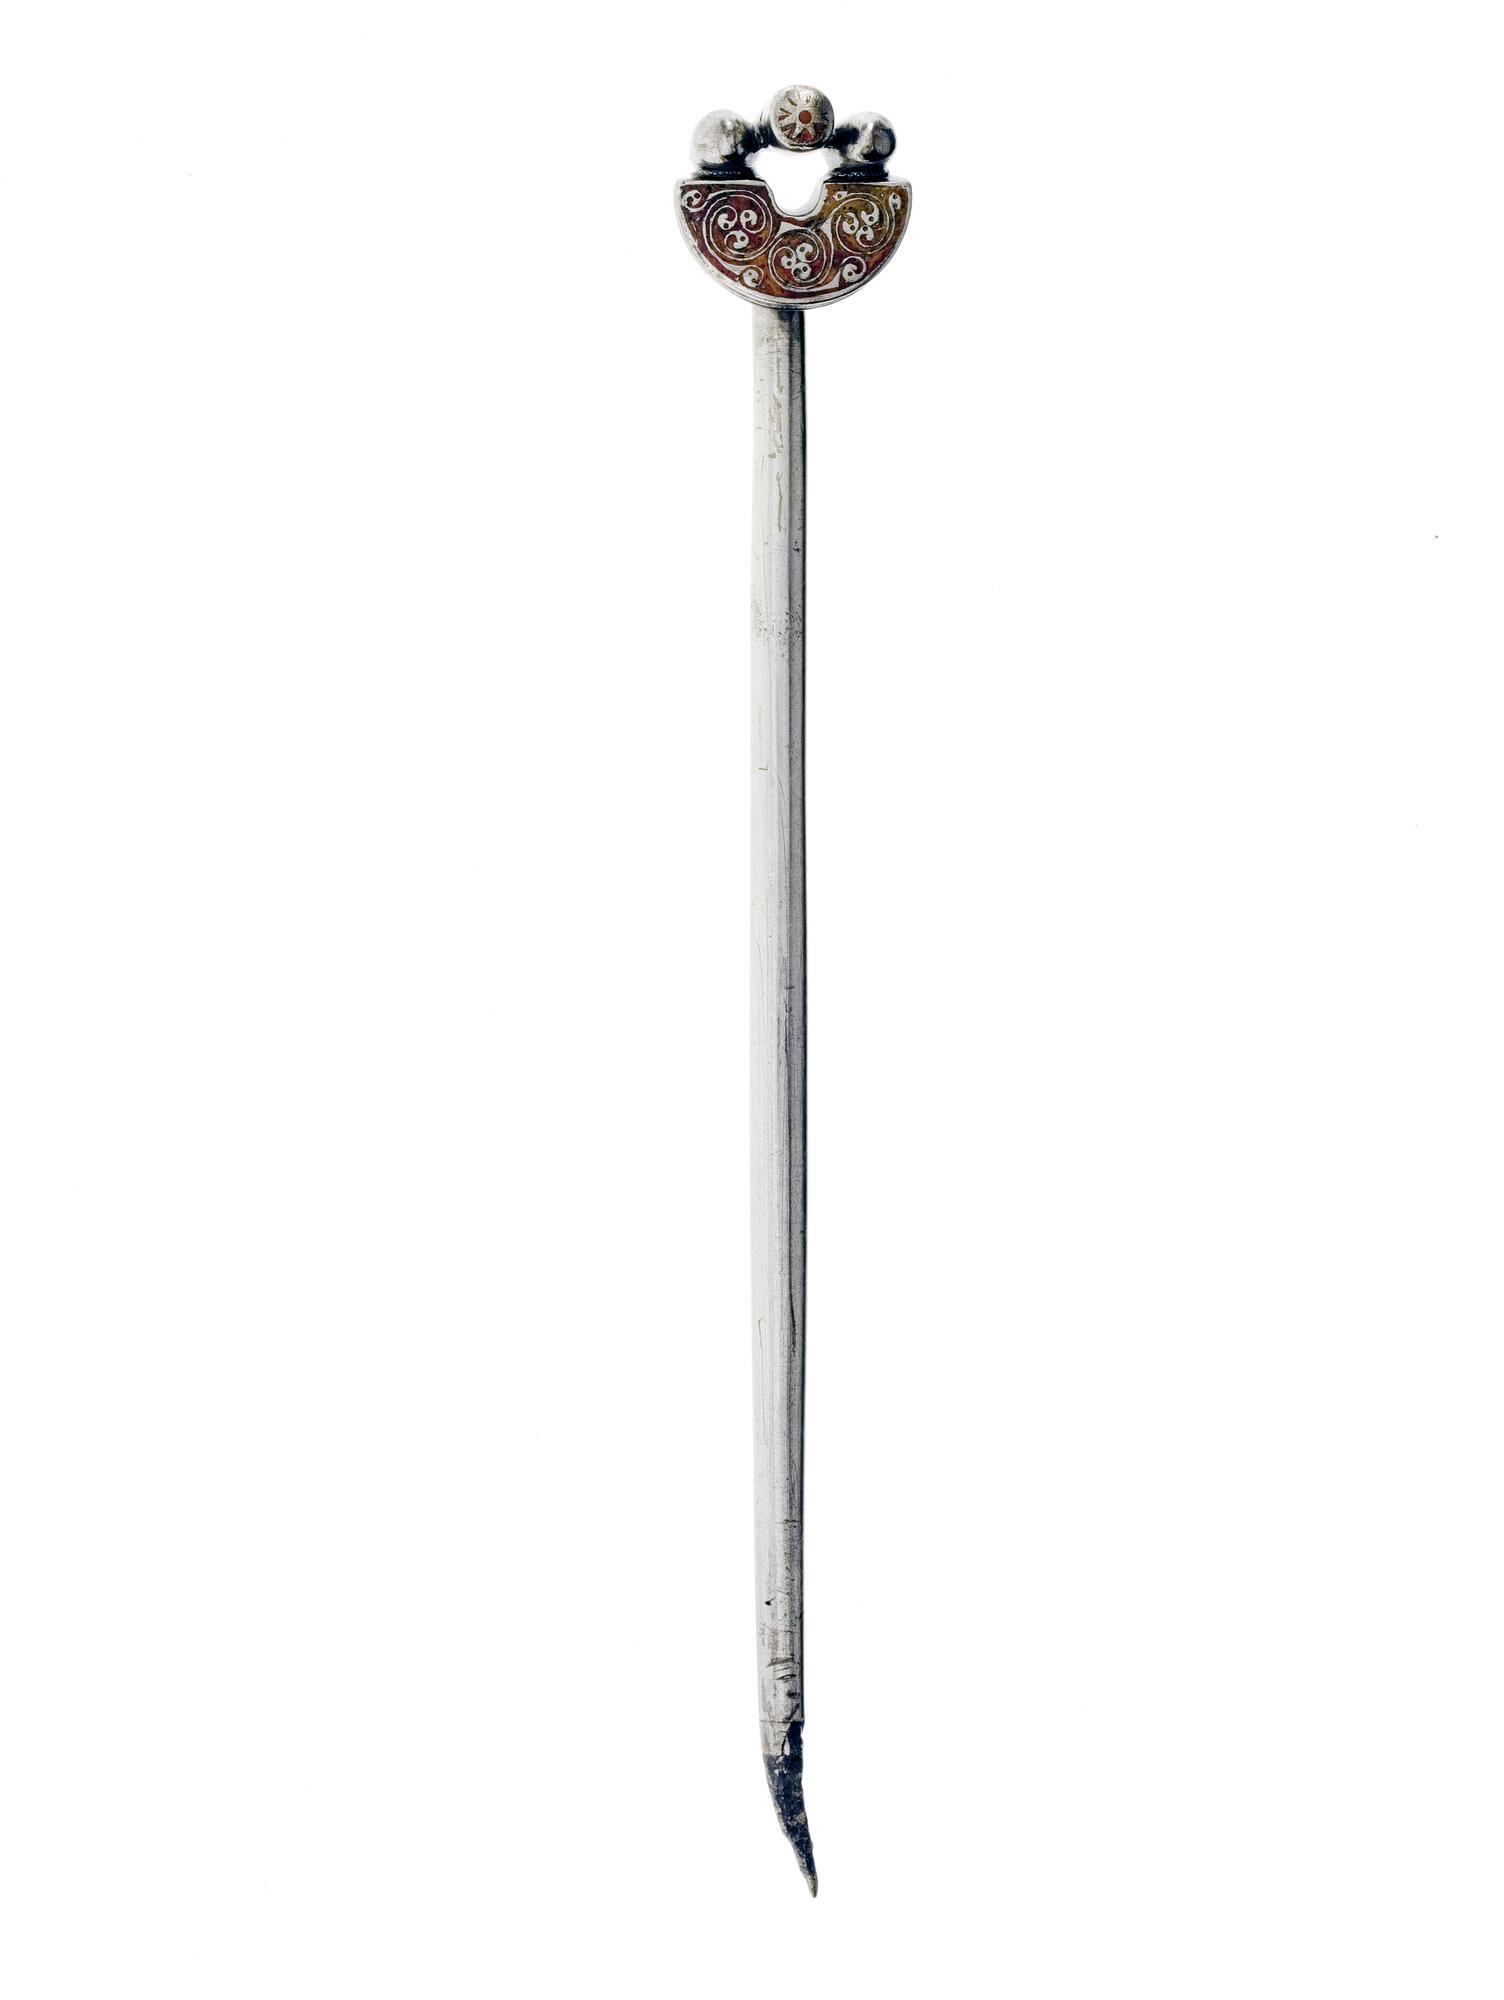 Image of Handpin of silver, with head enamelled red with spiral design, from the Pictish hoard at Gaulcross, Banffshire, 500 - 700 AD © National Museums Scotland